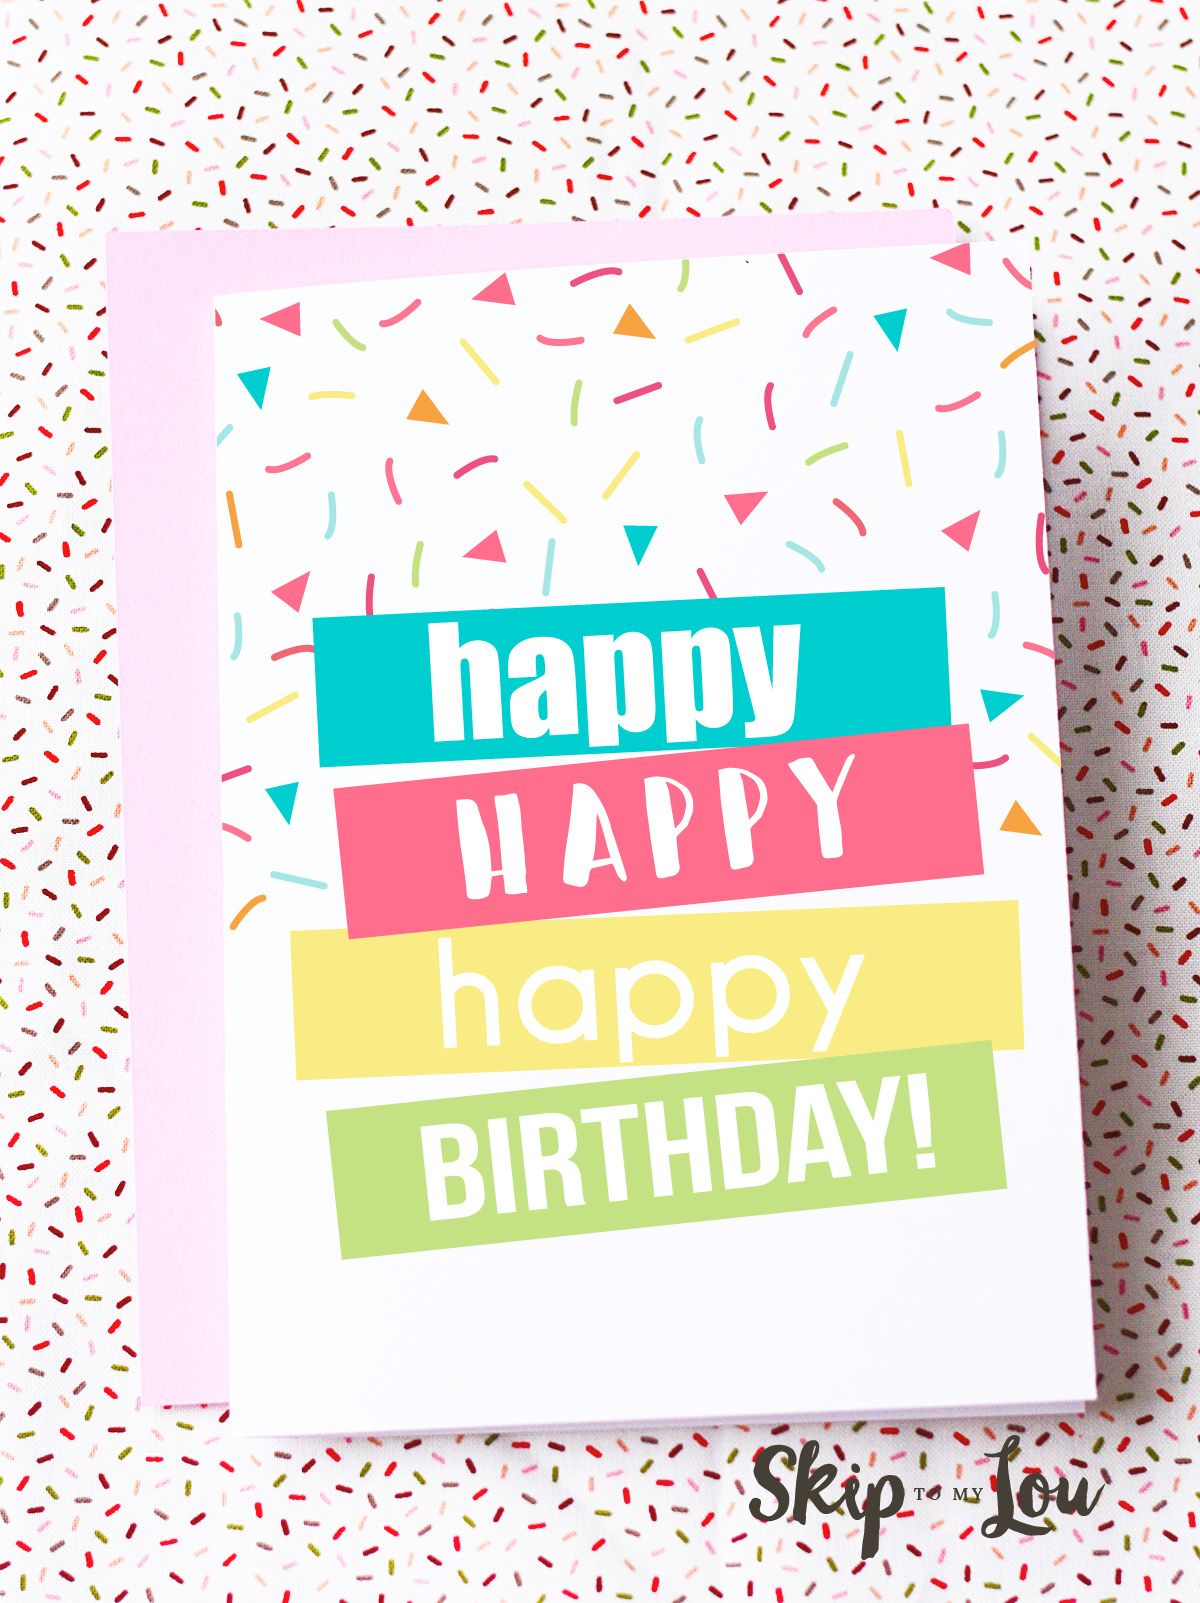 printable-birthday-cards-for-an-aunt-printbirthdaycards-printable-birthday-cards-for-an-aunt